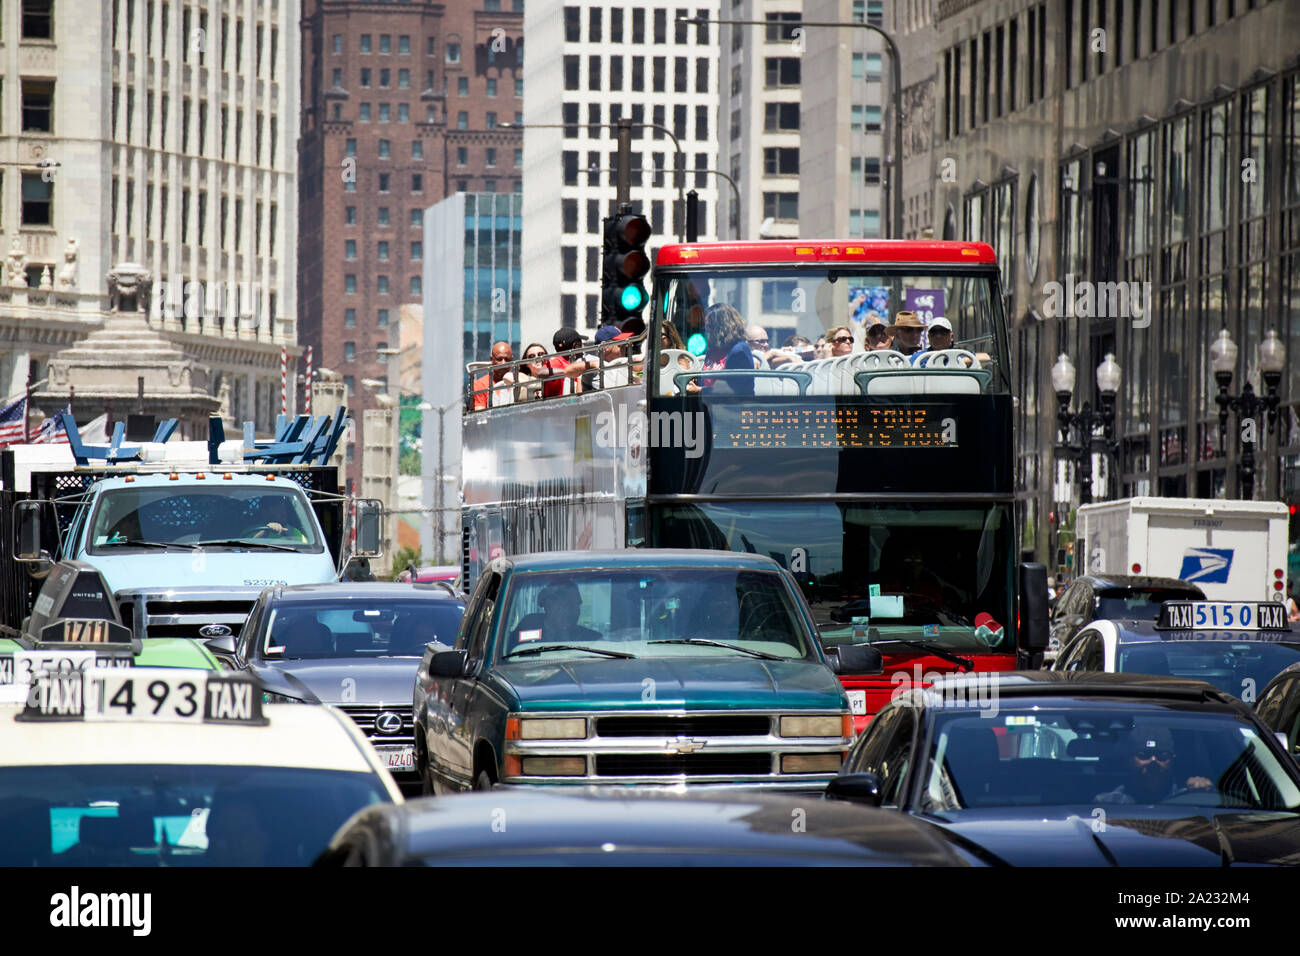 red open double deck bus tour stuck in traffic on michigan avenue downtown chicago illinois united states of america Stock Photo